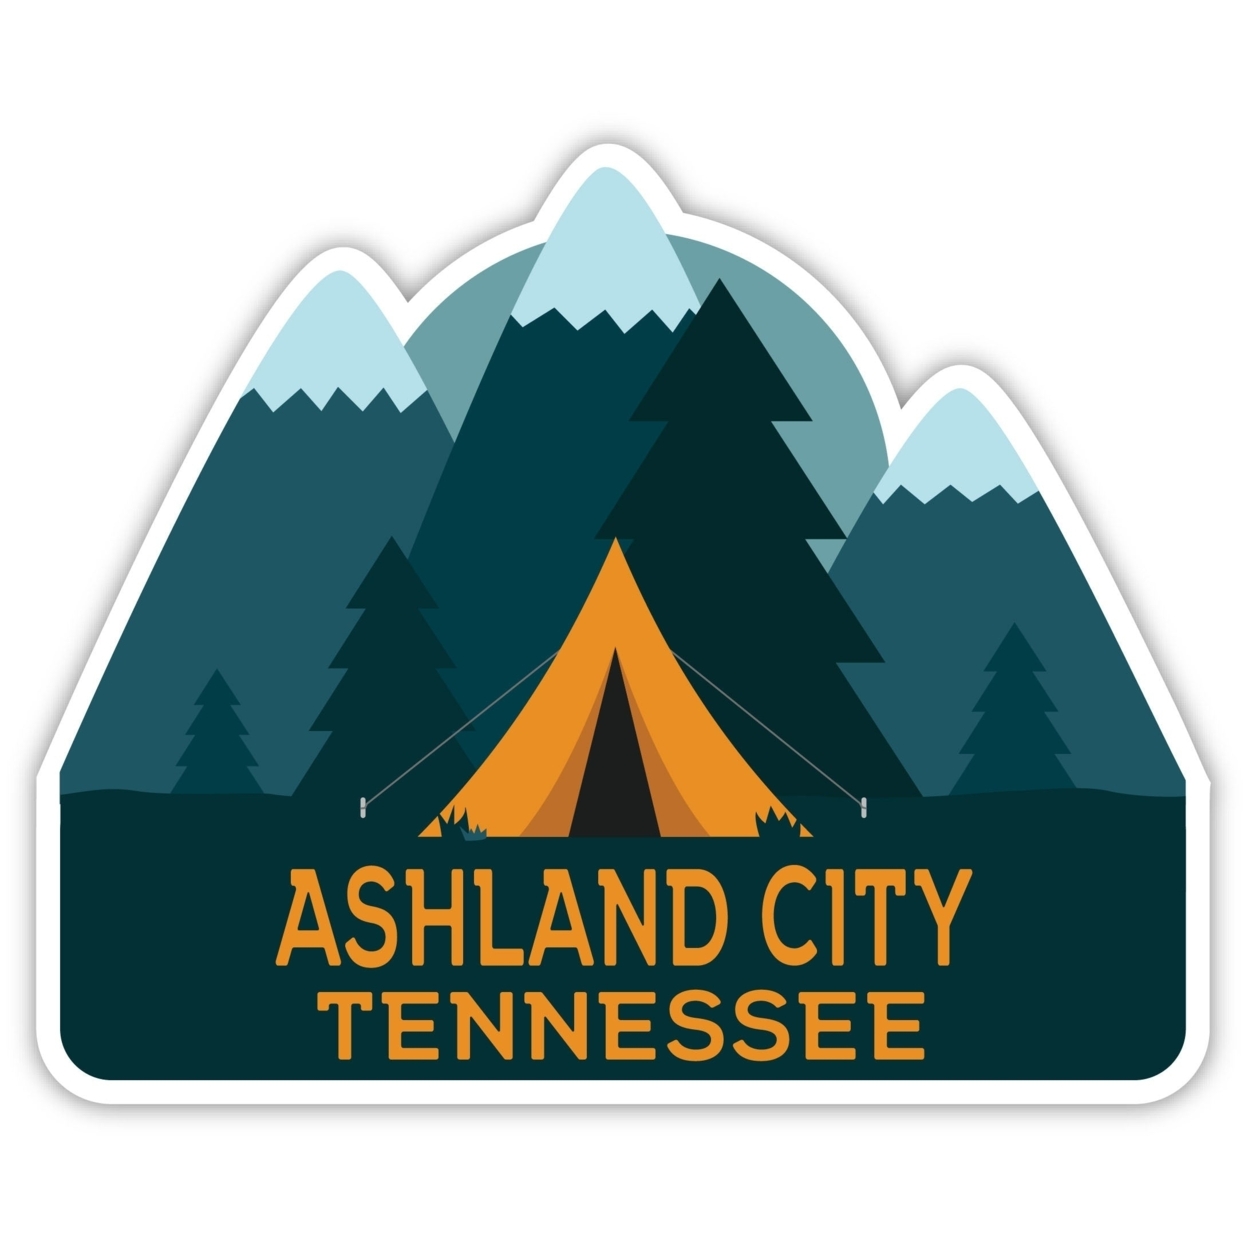 Ashland City Tennessee Souvenir Decorative Stickers (Choose Theme And Size) - 4-Pack, 8-Inch, Tent